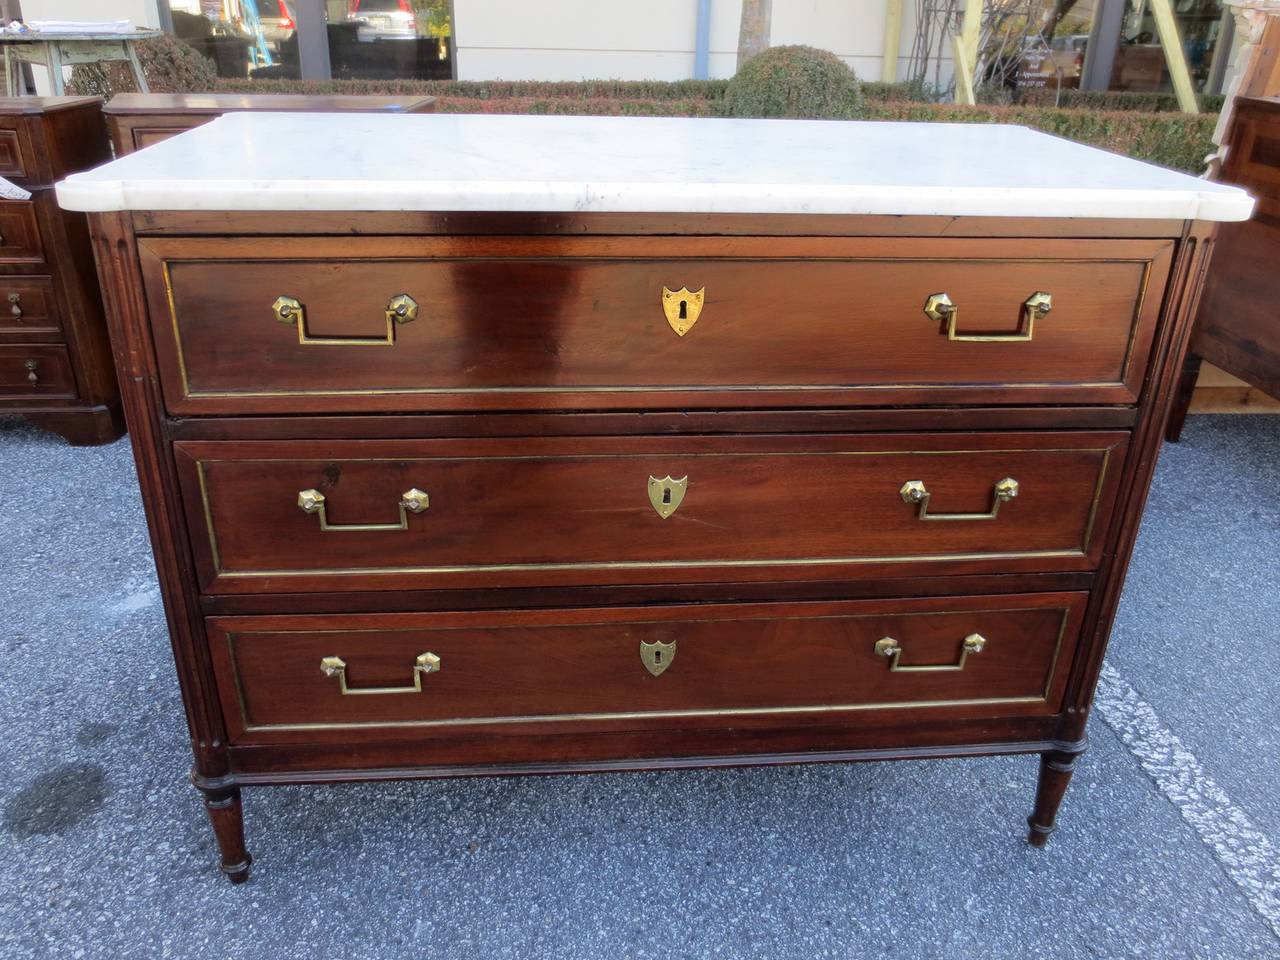 19th century French marble-top commode.